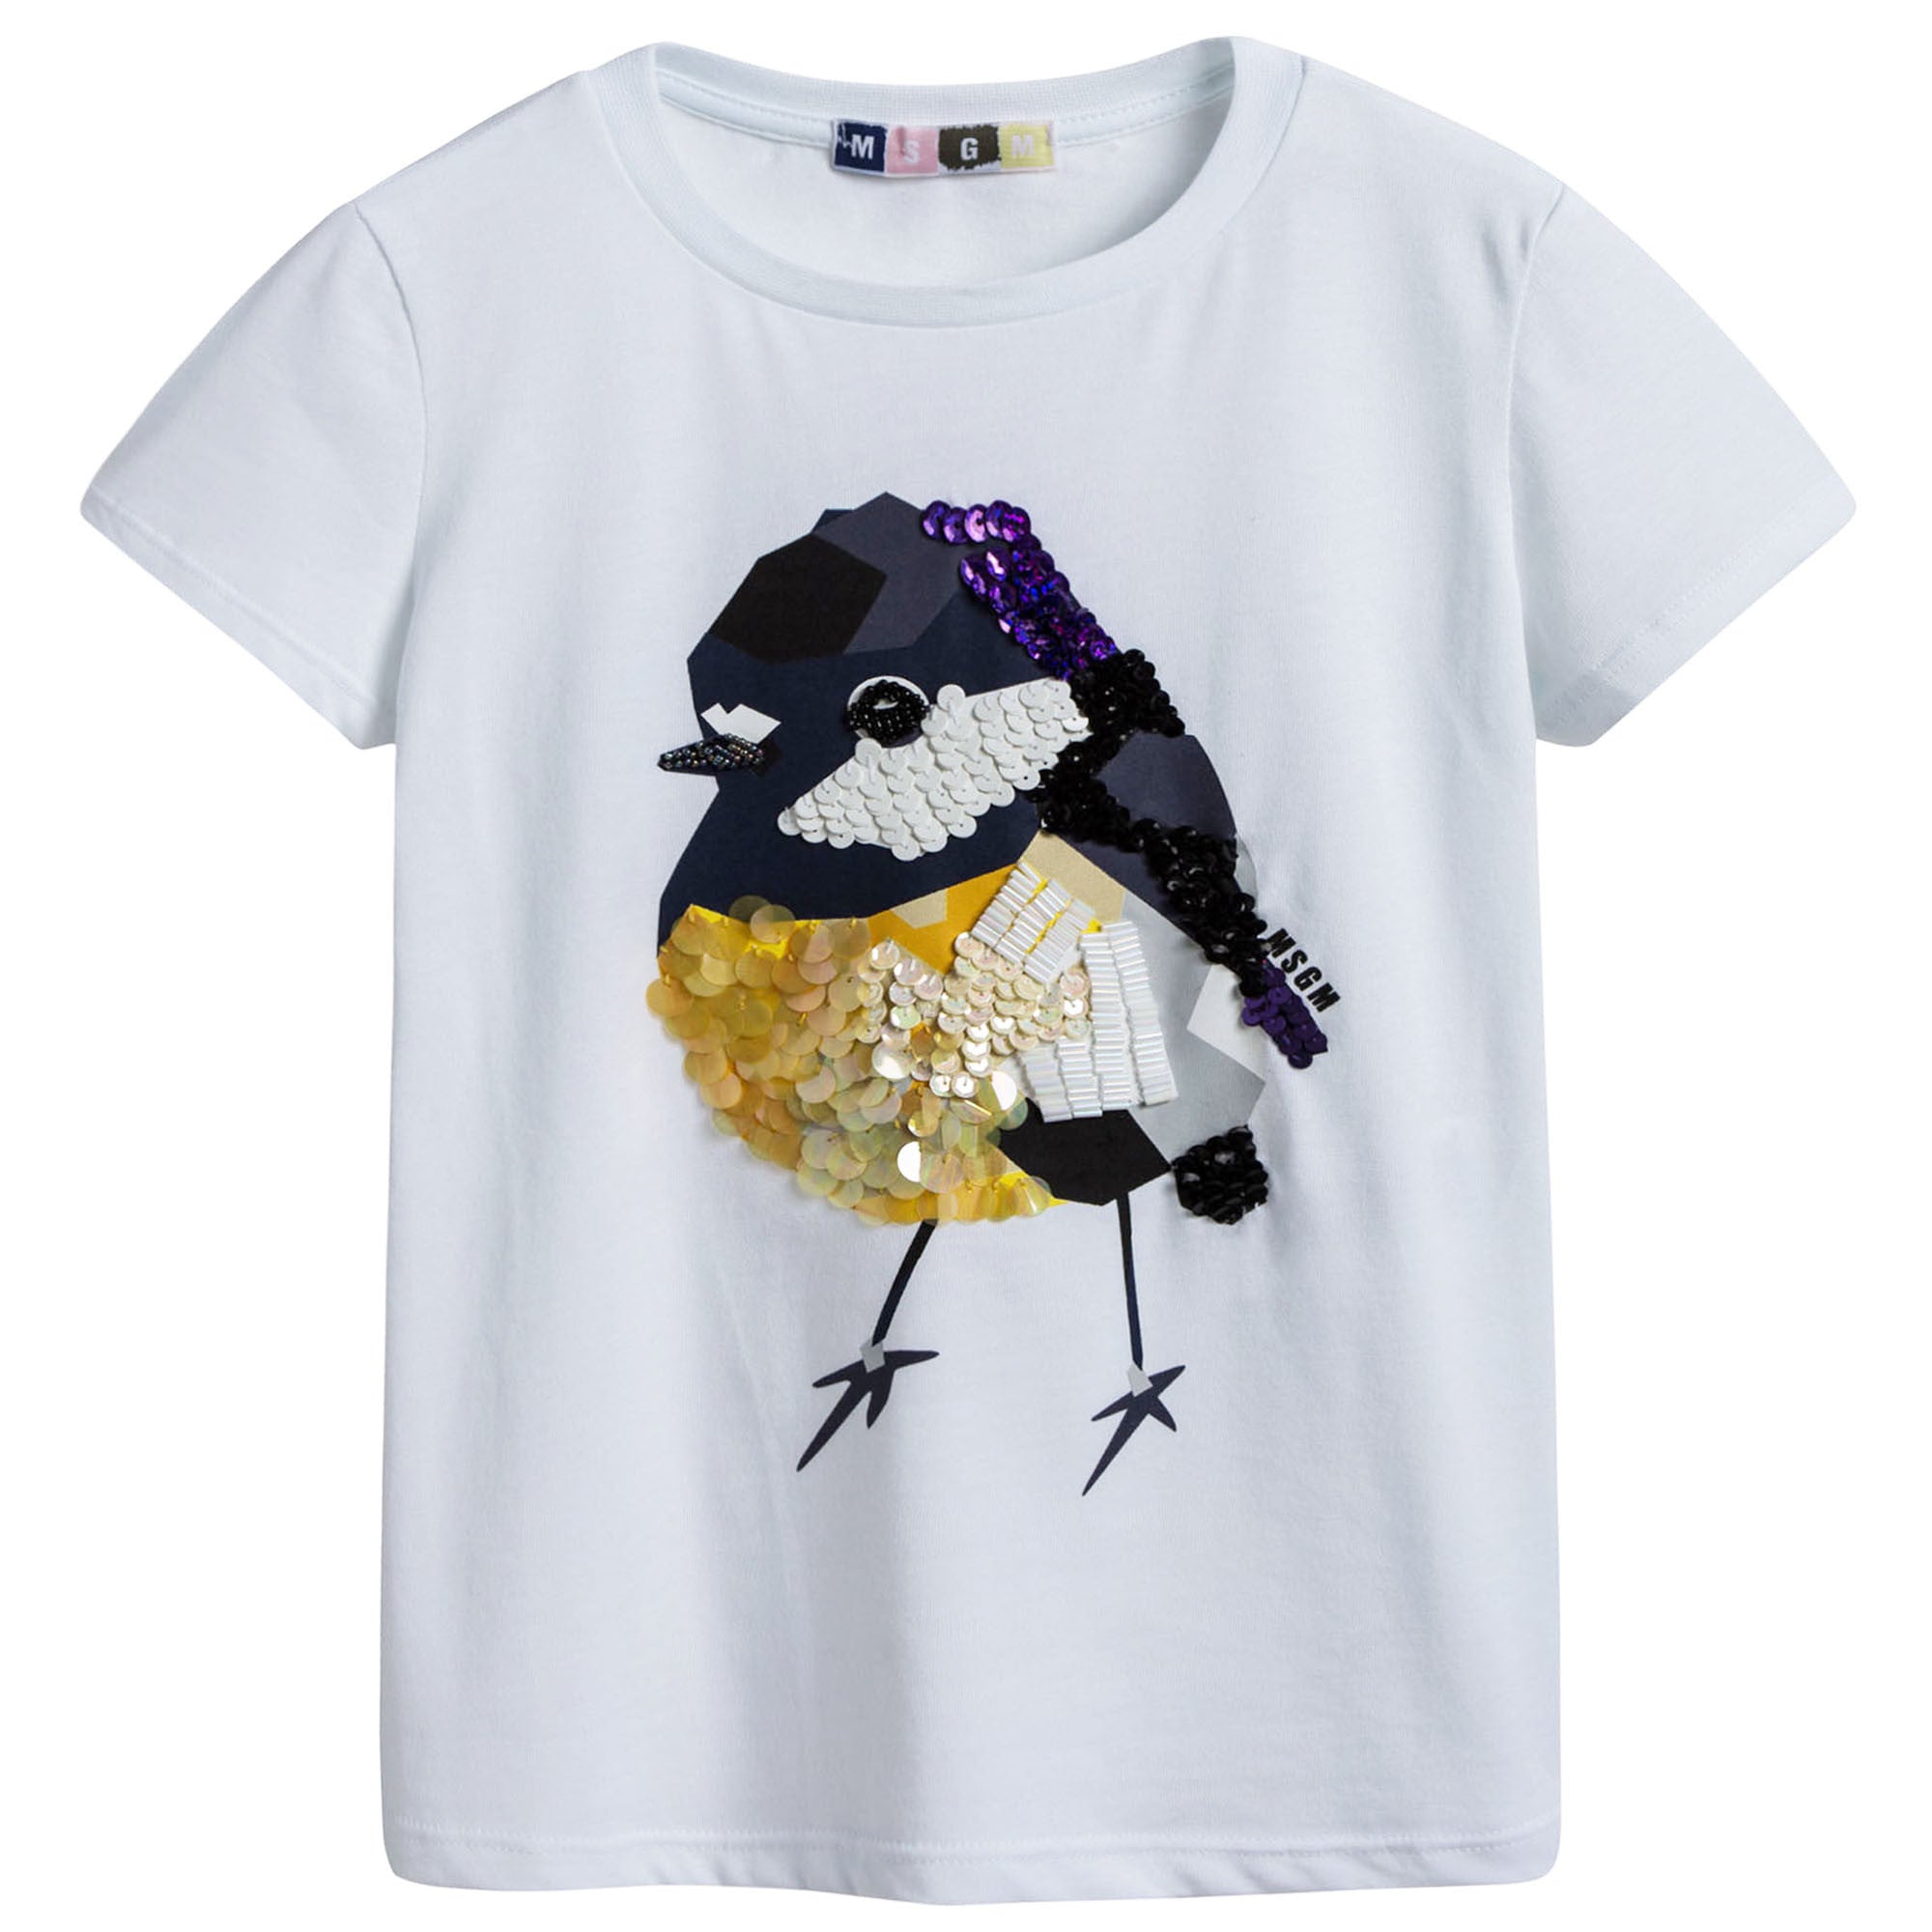 Girls White Cotton T-Shirt With Multicolor Chick Print